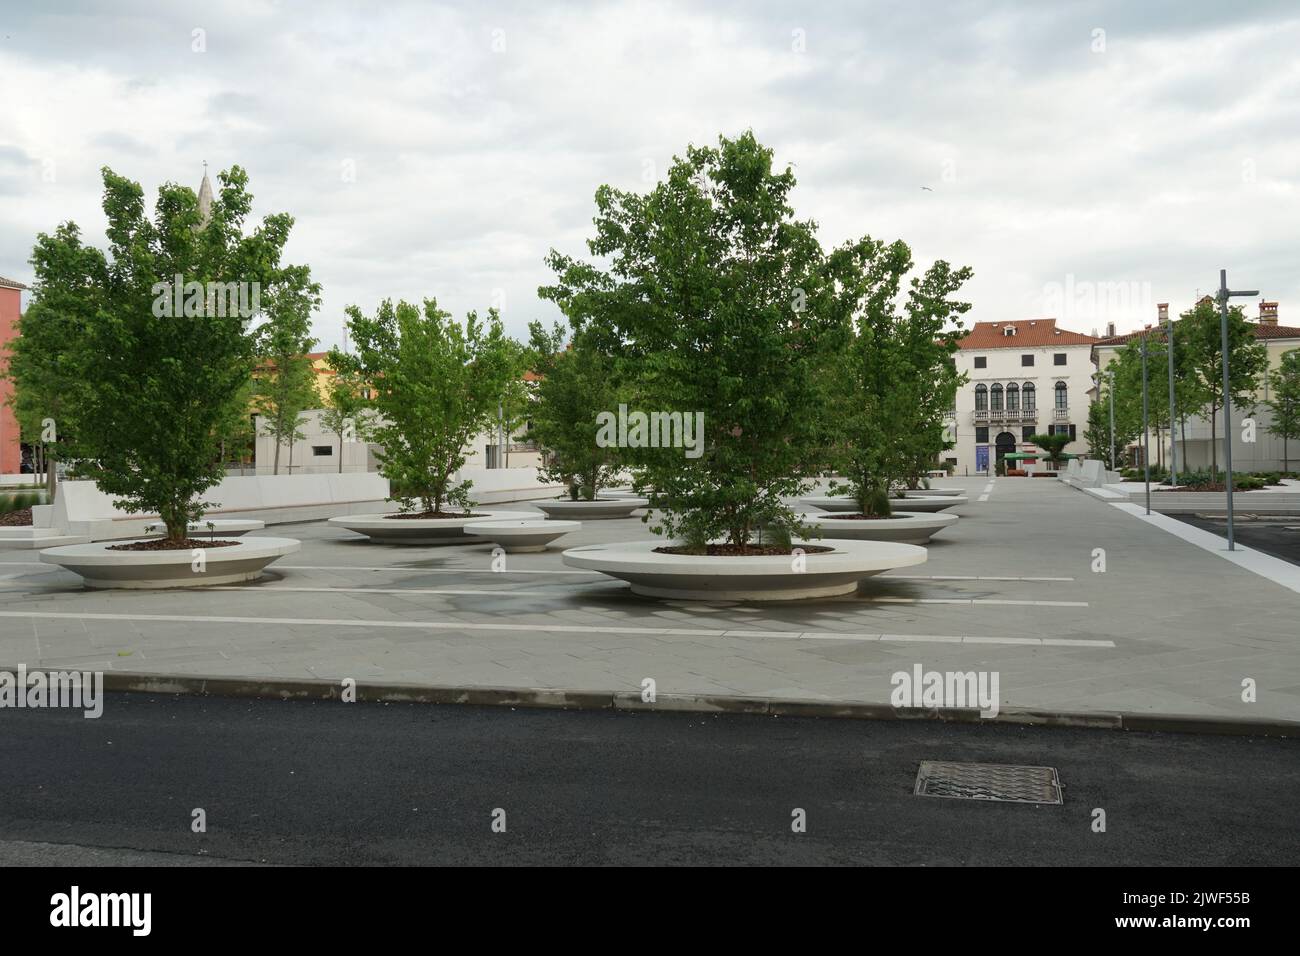 View on stone large planters for live trees in residential area between houses and modern blocks of flats along main road in Koper. Stock Photo